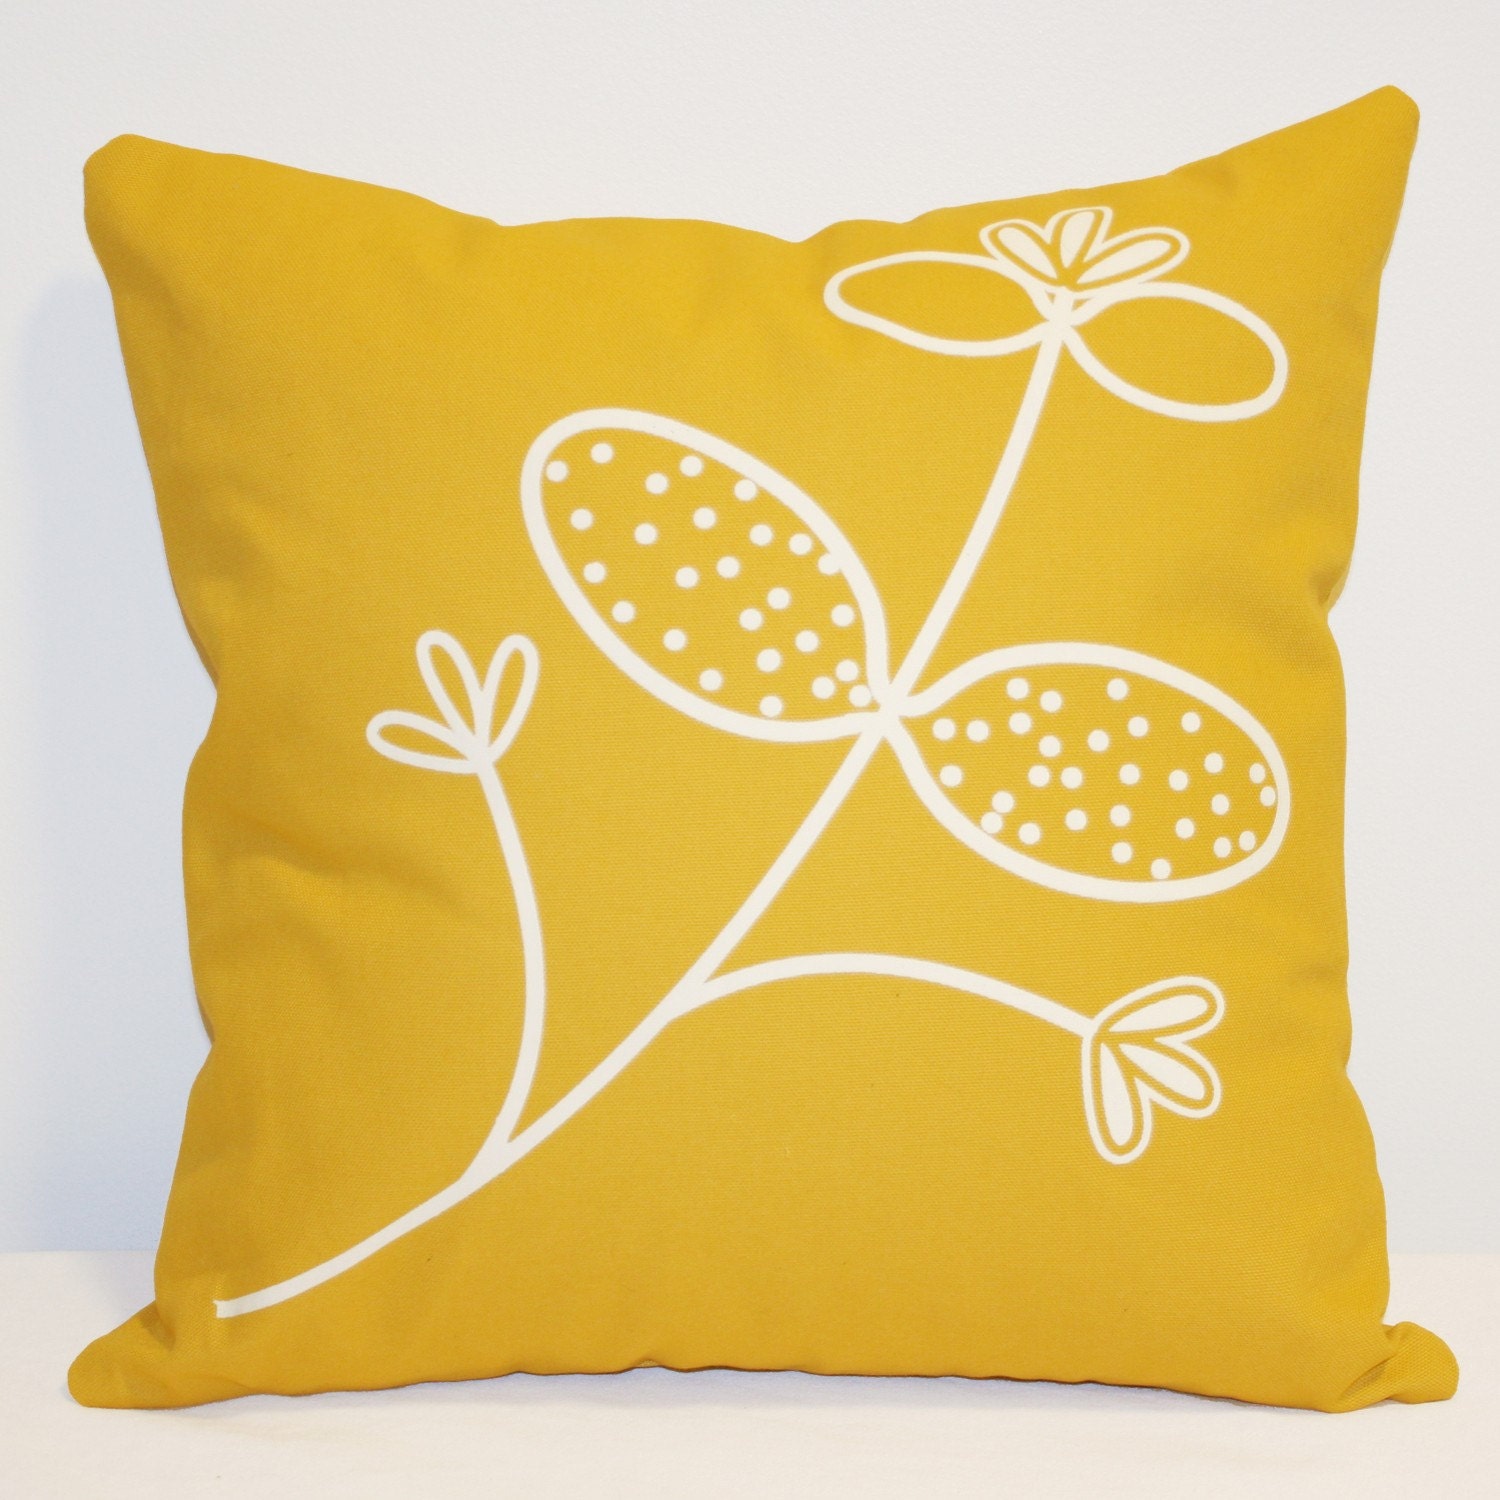 16 in Square Throw Pillow - Sunshine Yellow with Honeysuckle flower print in white ink - wickedmint